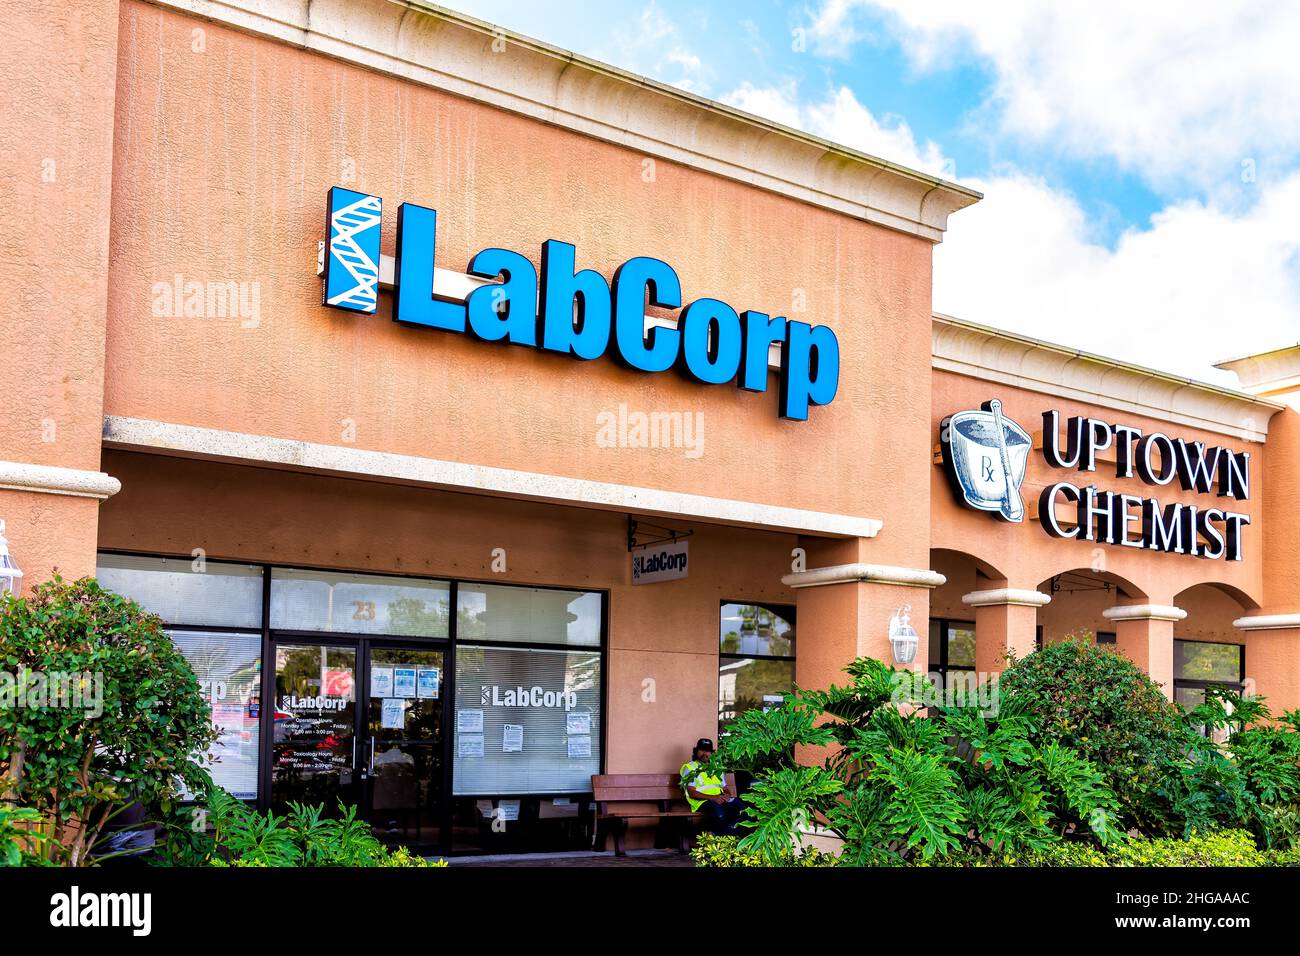 Naples, USA - January 27, 2021: Laboratory Corporation of America Holdings LabCorp office in Florida with blue sign text at entrance to strip mall bui Stock Photo